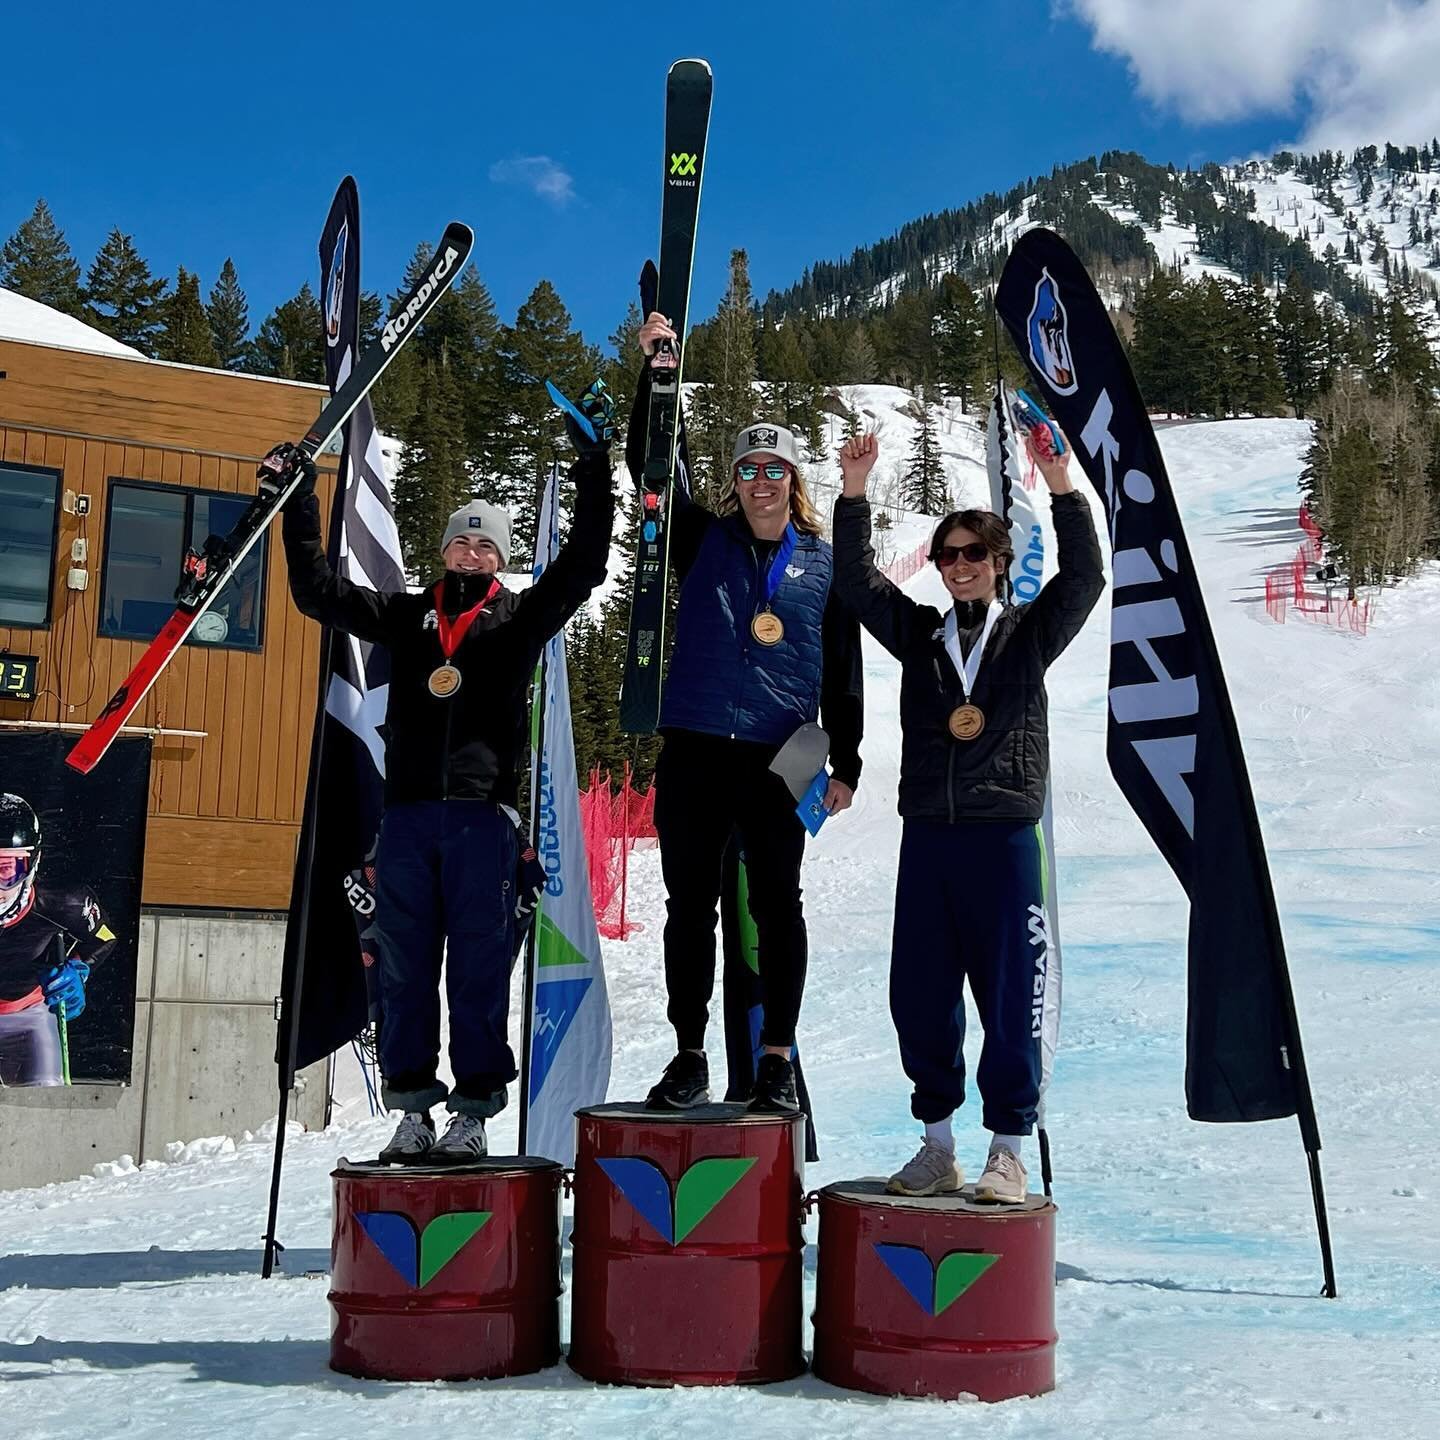 ⛷️ Only the @kuhl @sbsef Snow Cup could pull me out of retirement! This old man had a blast racing the past few days with some fast athletes! I may be a few decades late, but I got the Snow Cup W with my kiddos cheering me on! Huge thanks to my @sbse